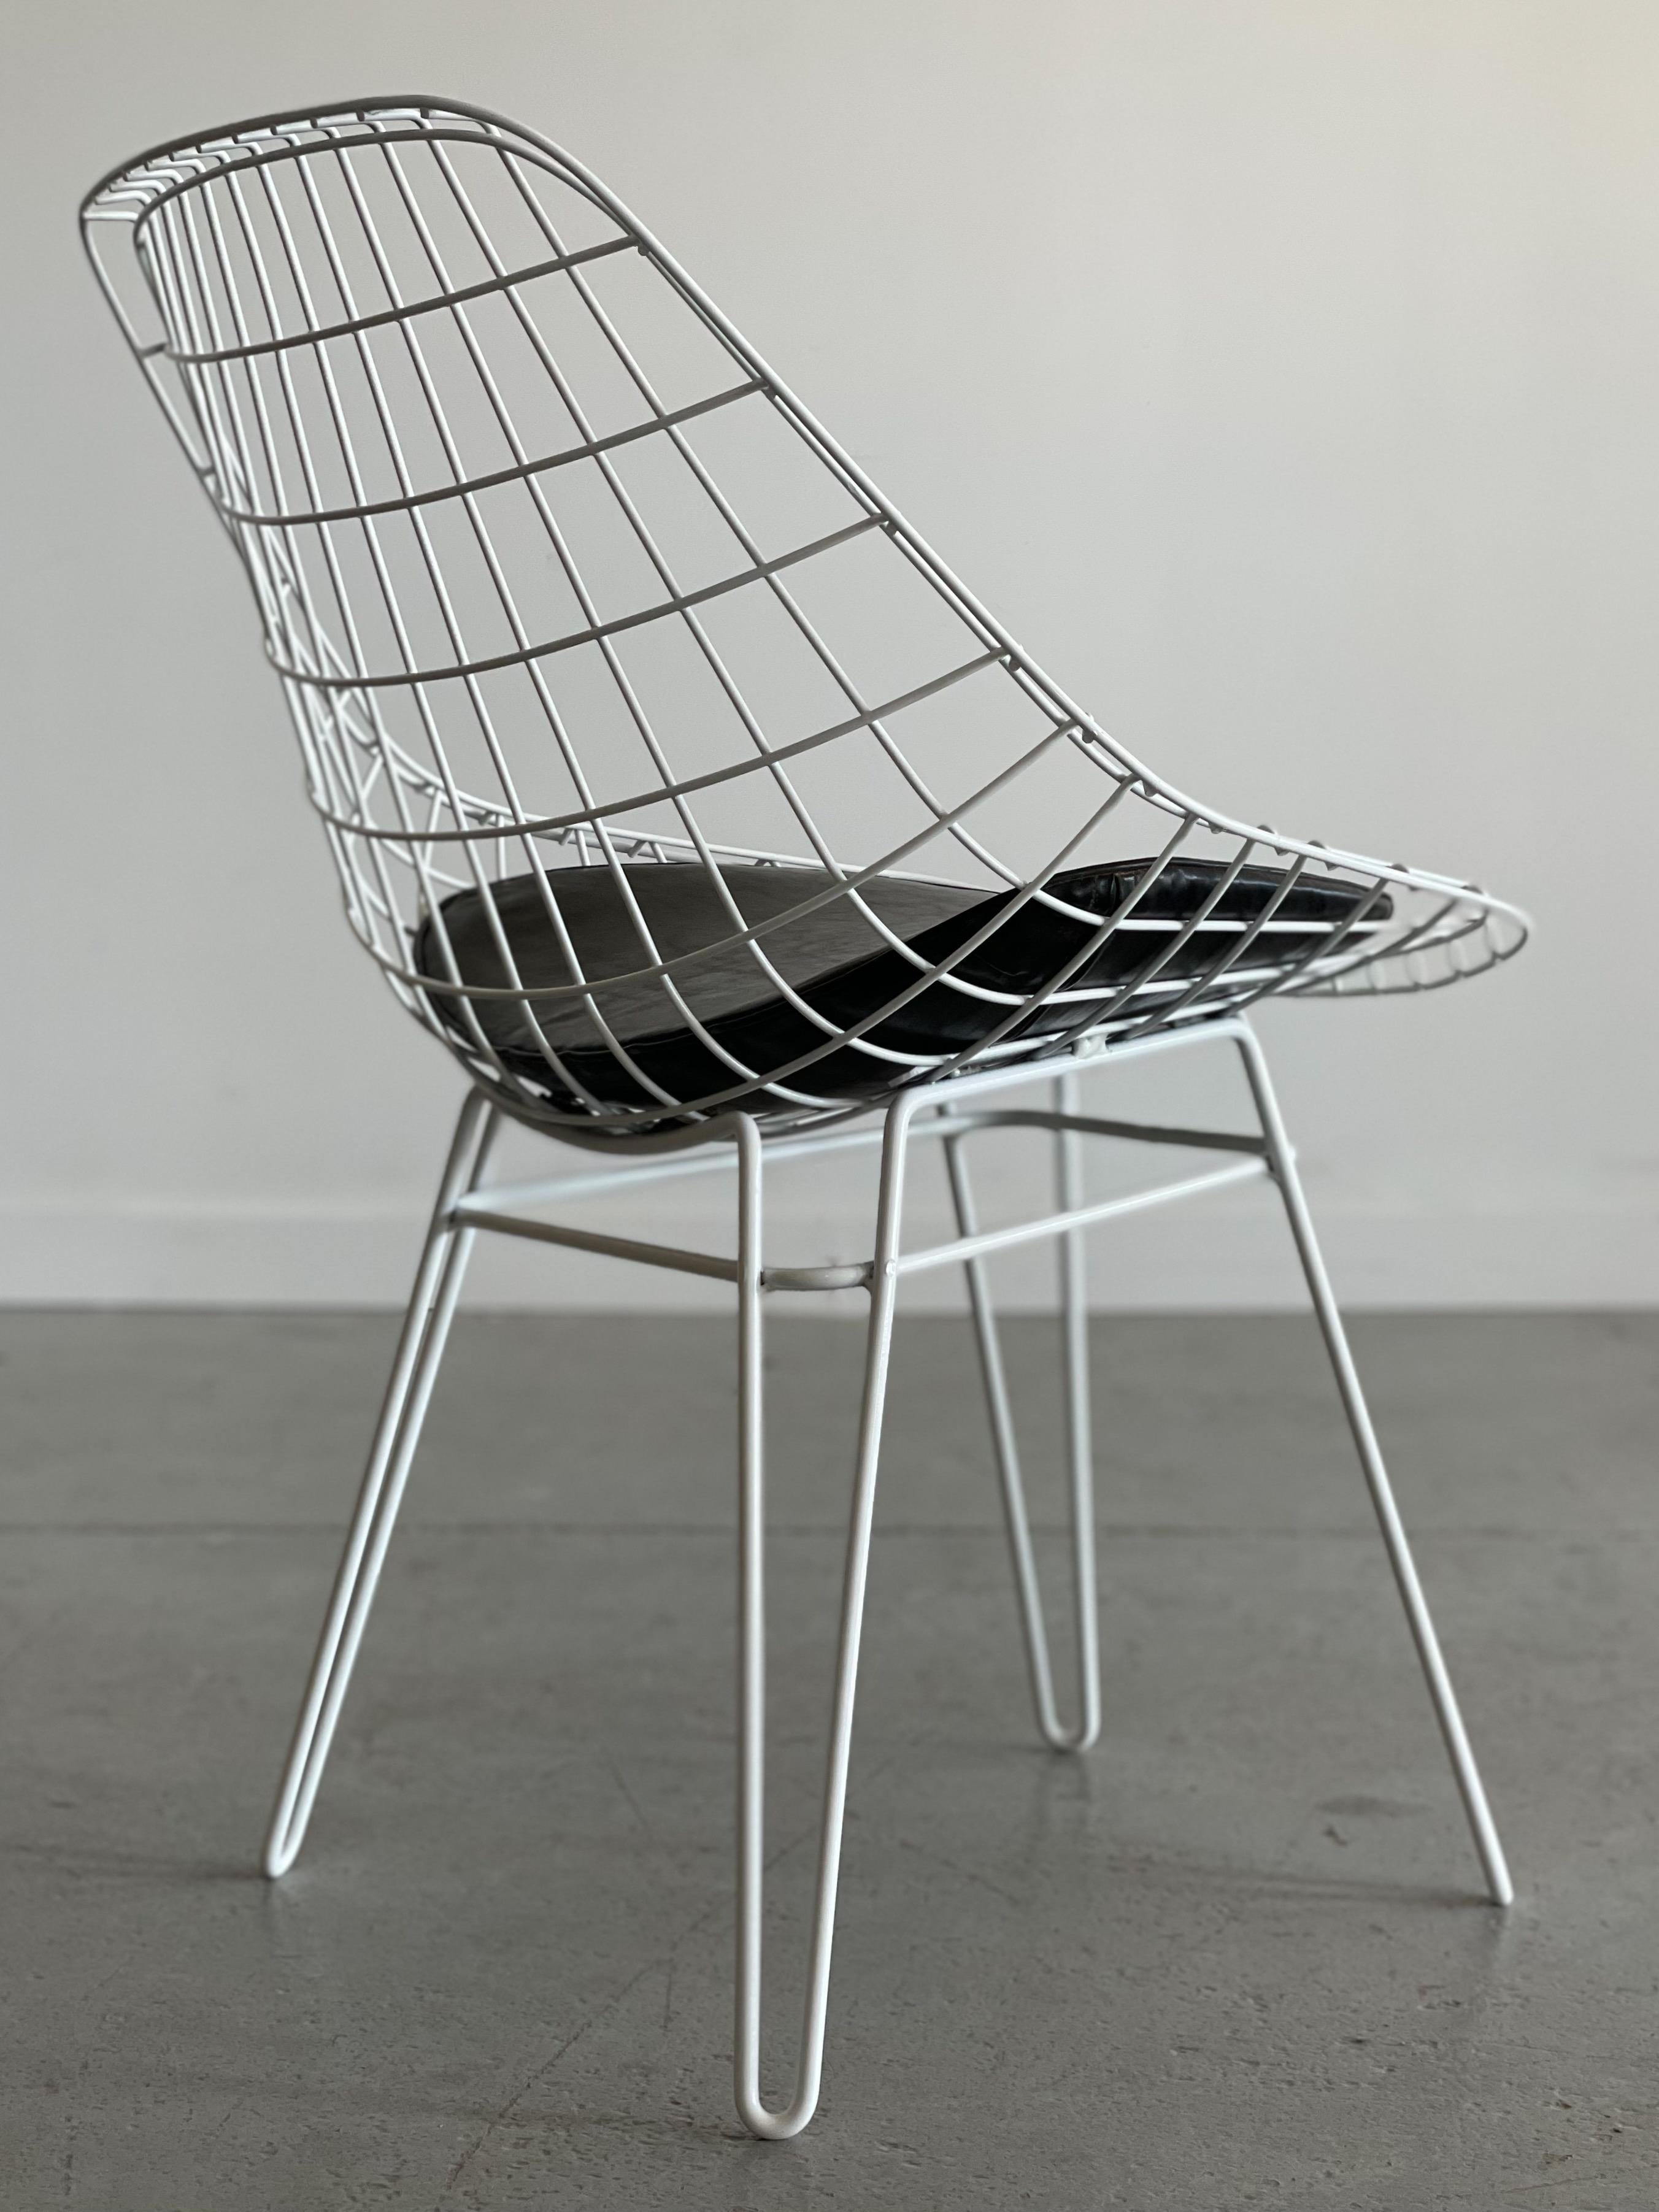 Amazing sculptural wire chair designed by Cees Braakman for Pastoe. This piece features a wire mesh body upon an angular hairpin base. It comes with original detachable vinyl seat pad. We haven’t seen another quite like it. Measures 23” W x 24” D x